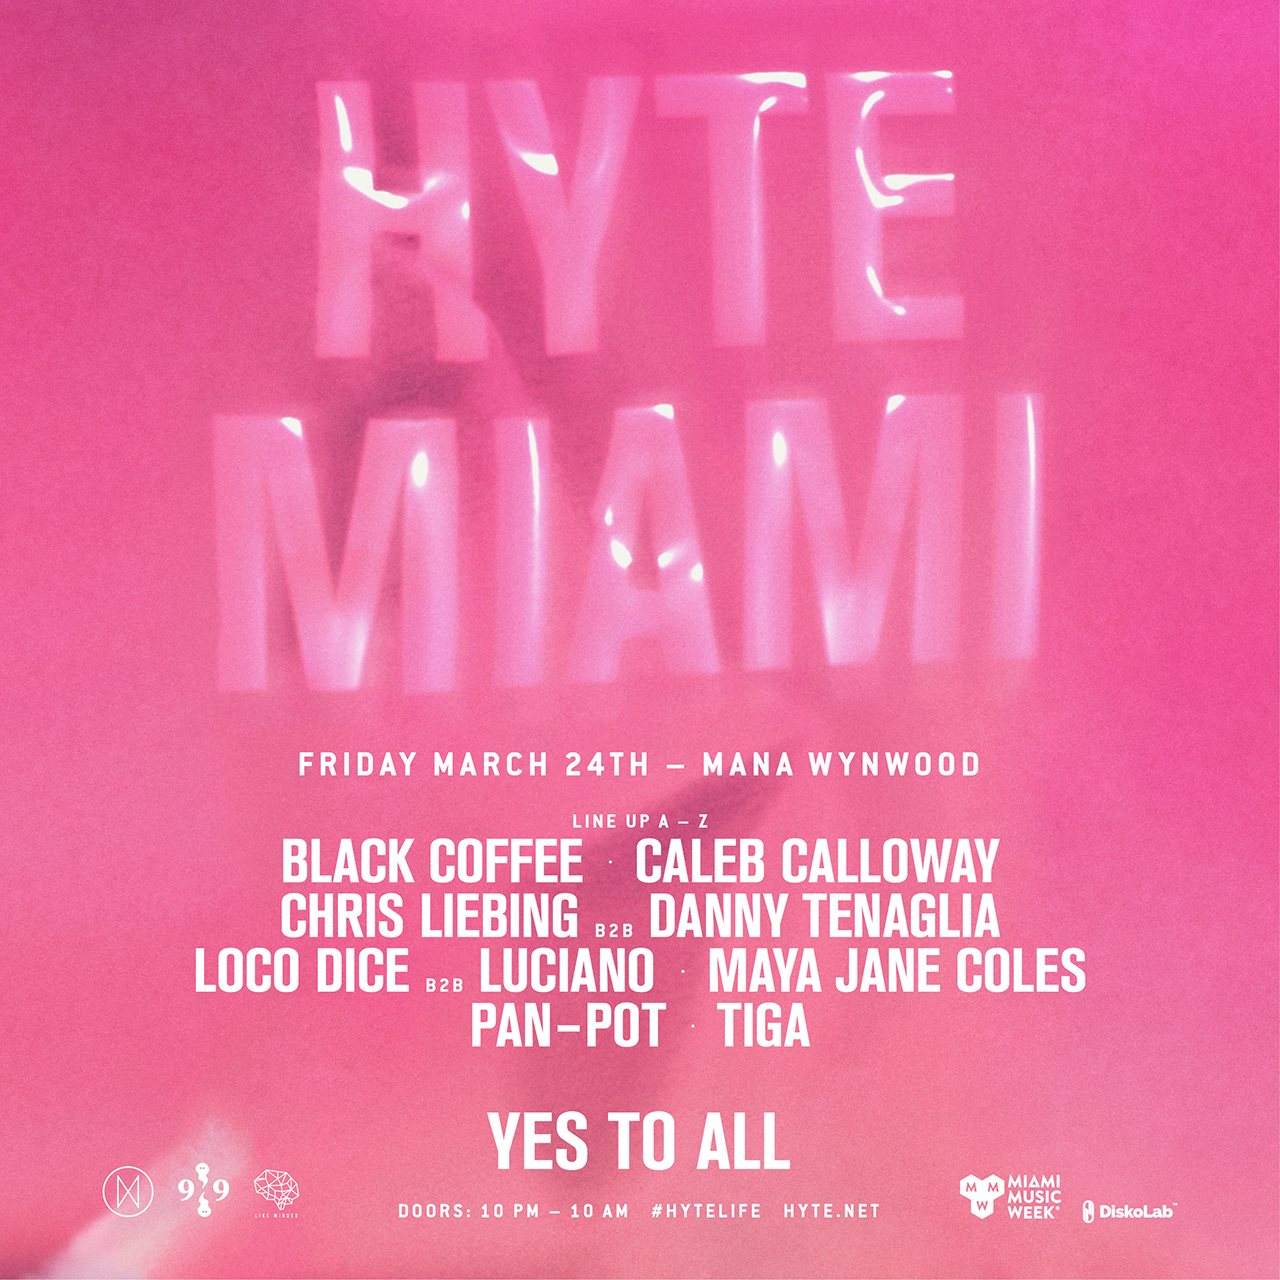 Black Coffee, Chris Liebing booked for HYTE Miami image